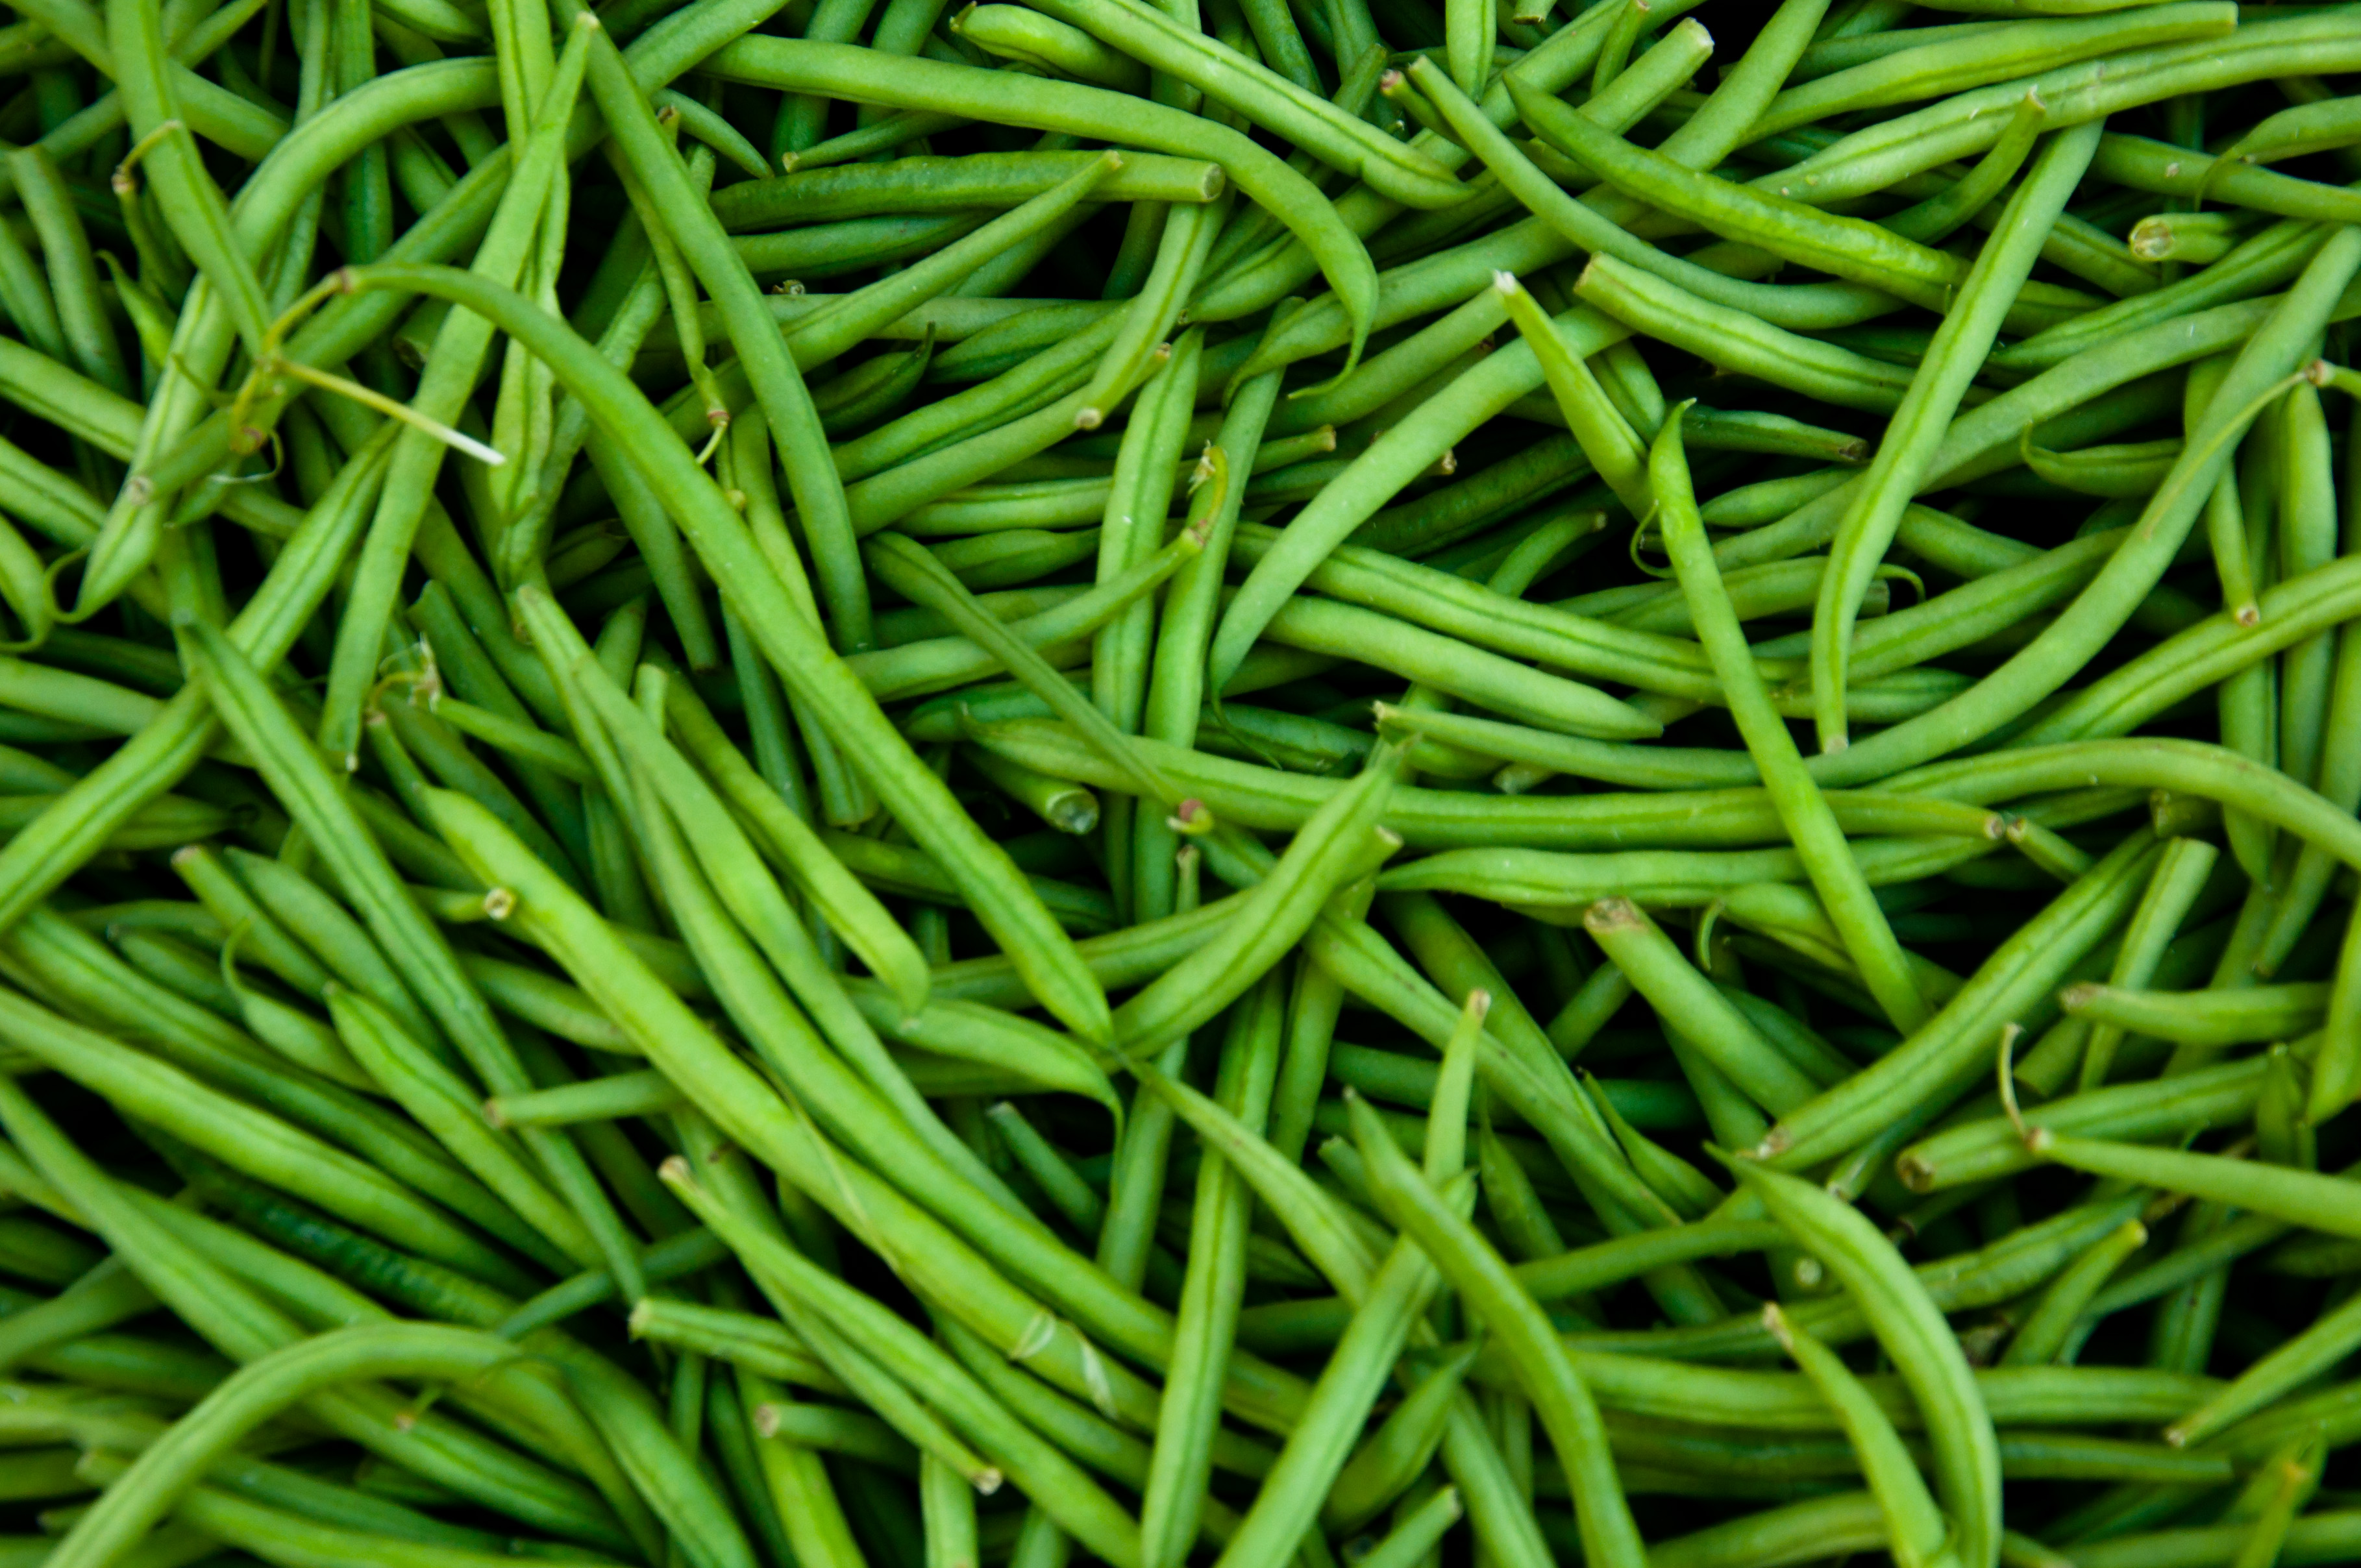 Green beans, Abstract, Healthy, Vegetable, String, HQ Photo